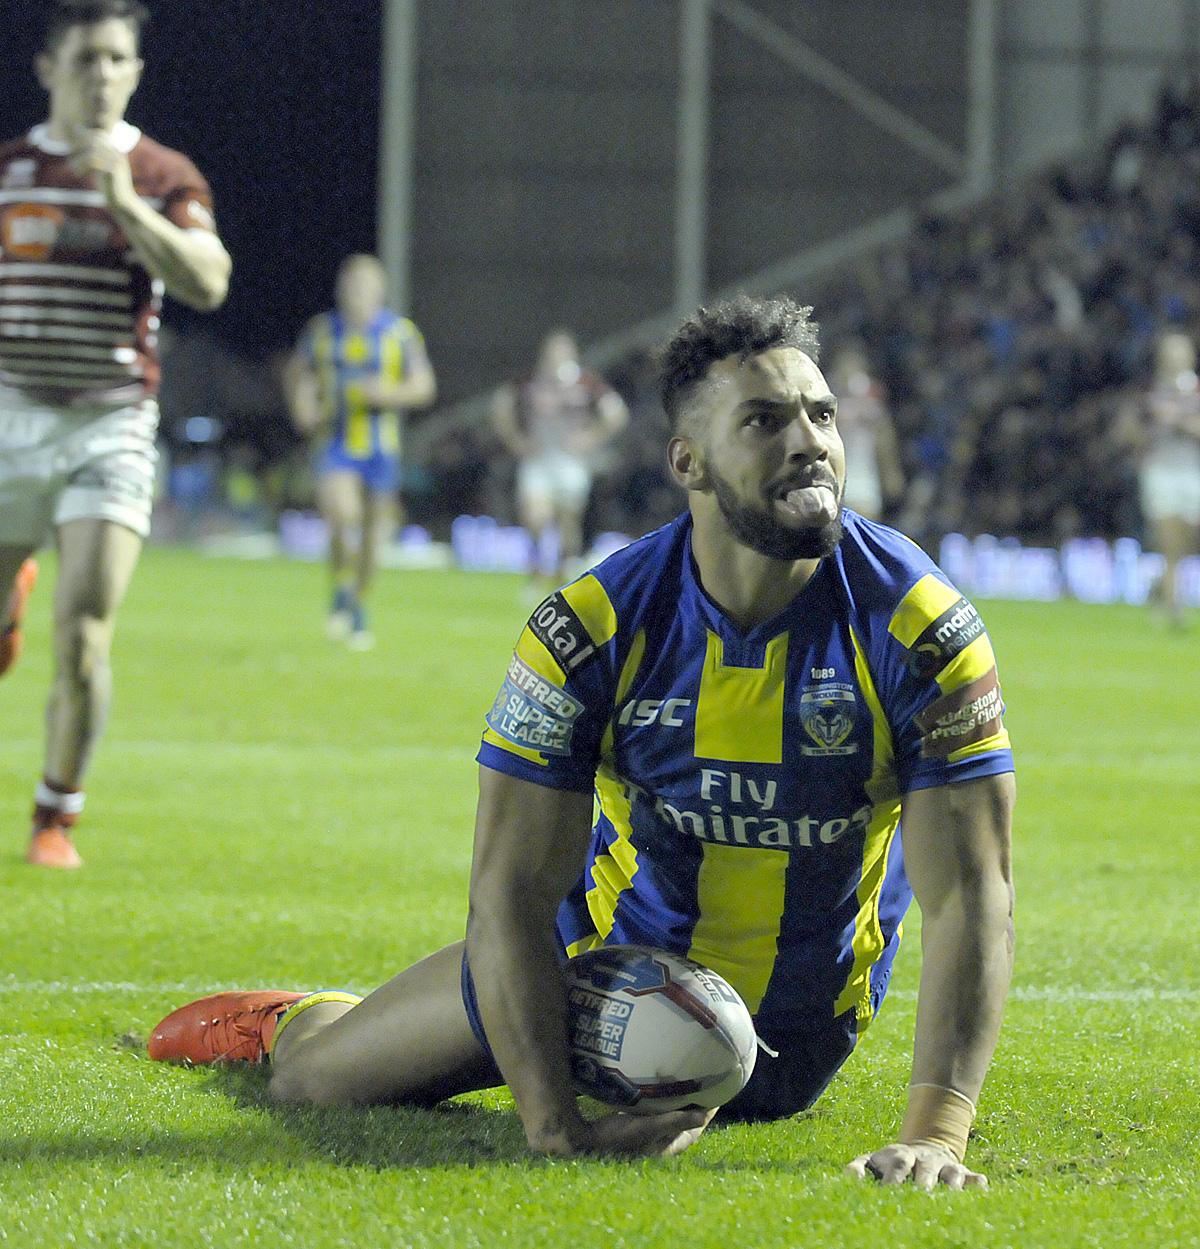 All the action from Wolves' Super League clash with neighbours Wigan. Pictures by Mike Boden